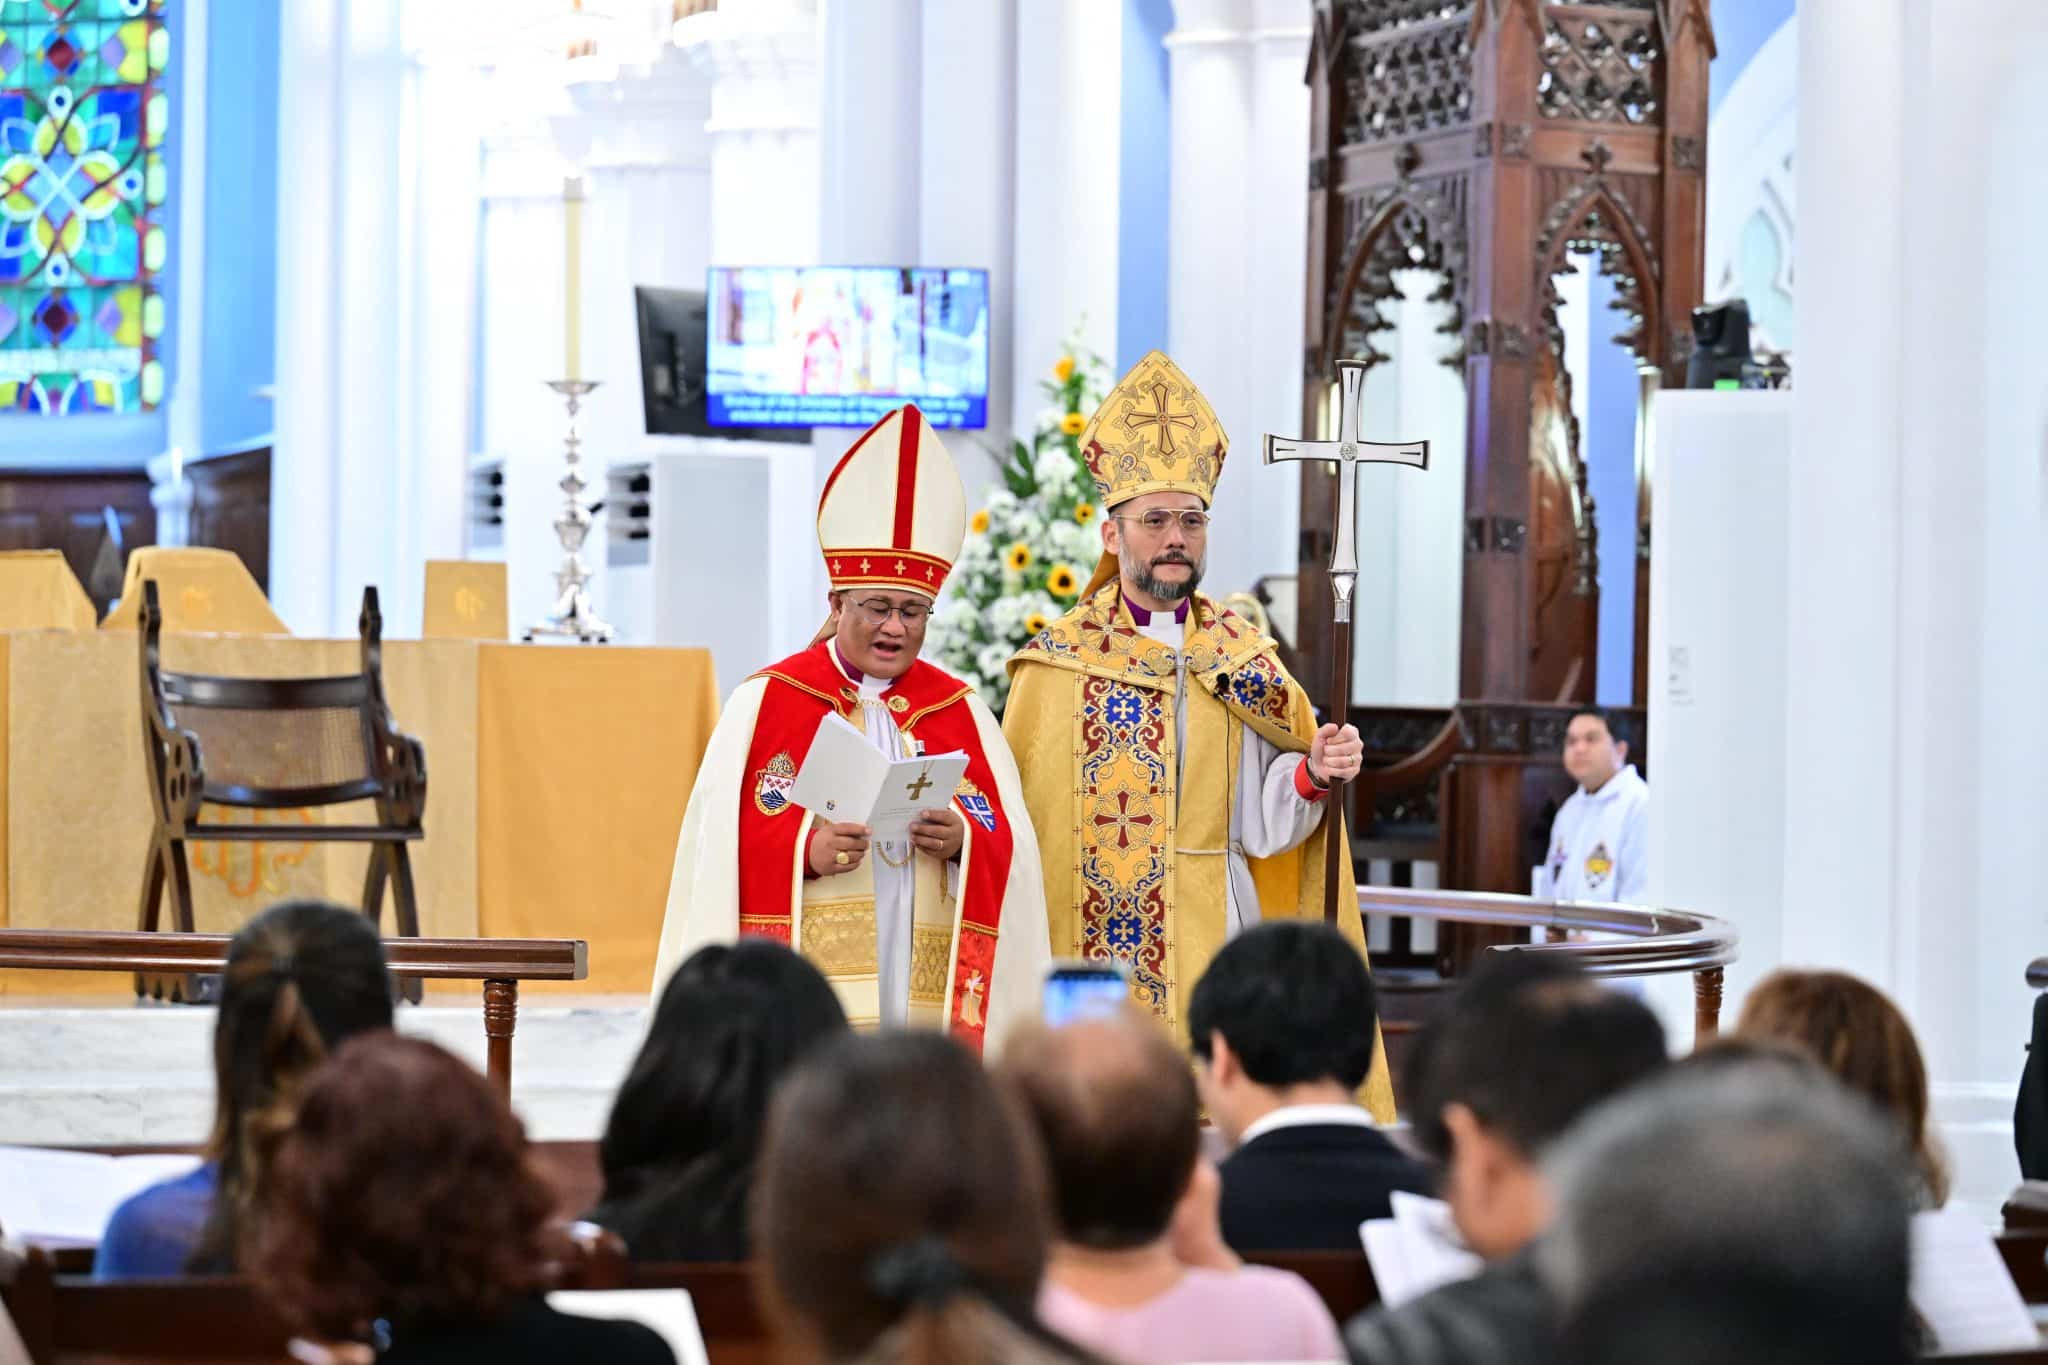 Bishop Titus Chung, who was elected for the role last September, succeeds the Most Reverend Datuk Melter Jiki Tais, the Bishop of Sabah, who has served as Archbishop of the Province since 2020. All photos courtesy of the Diocese of Singapore.